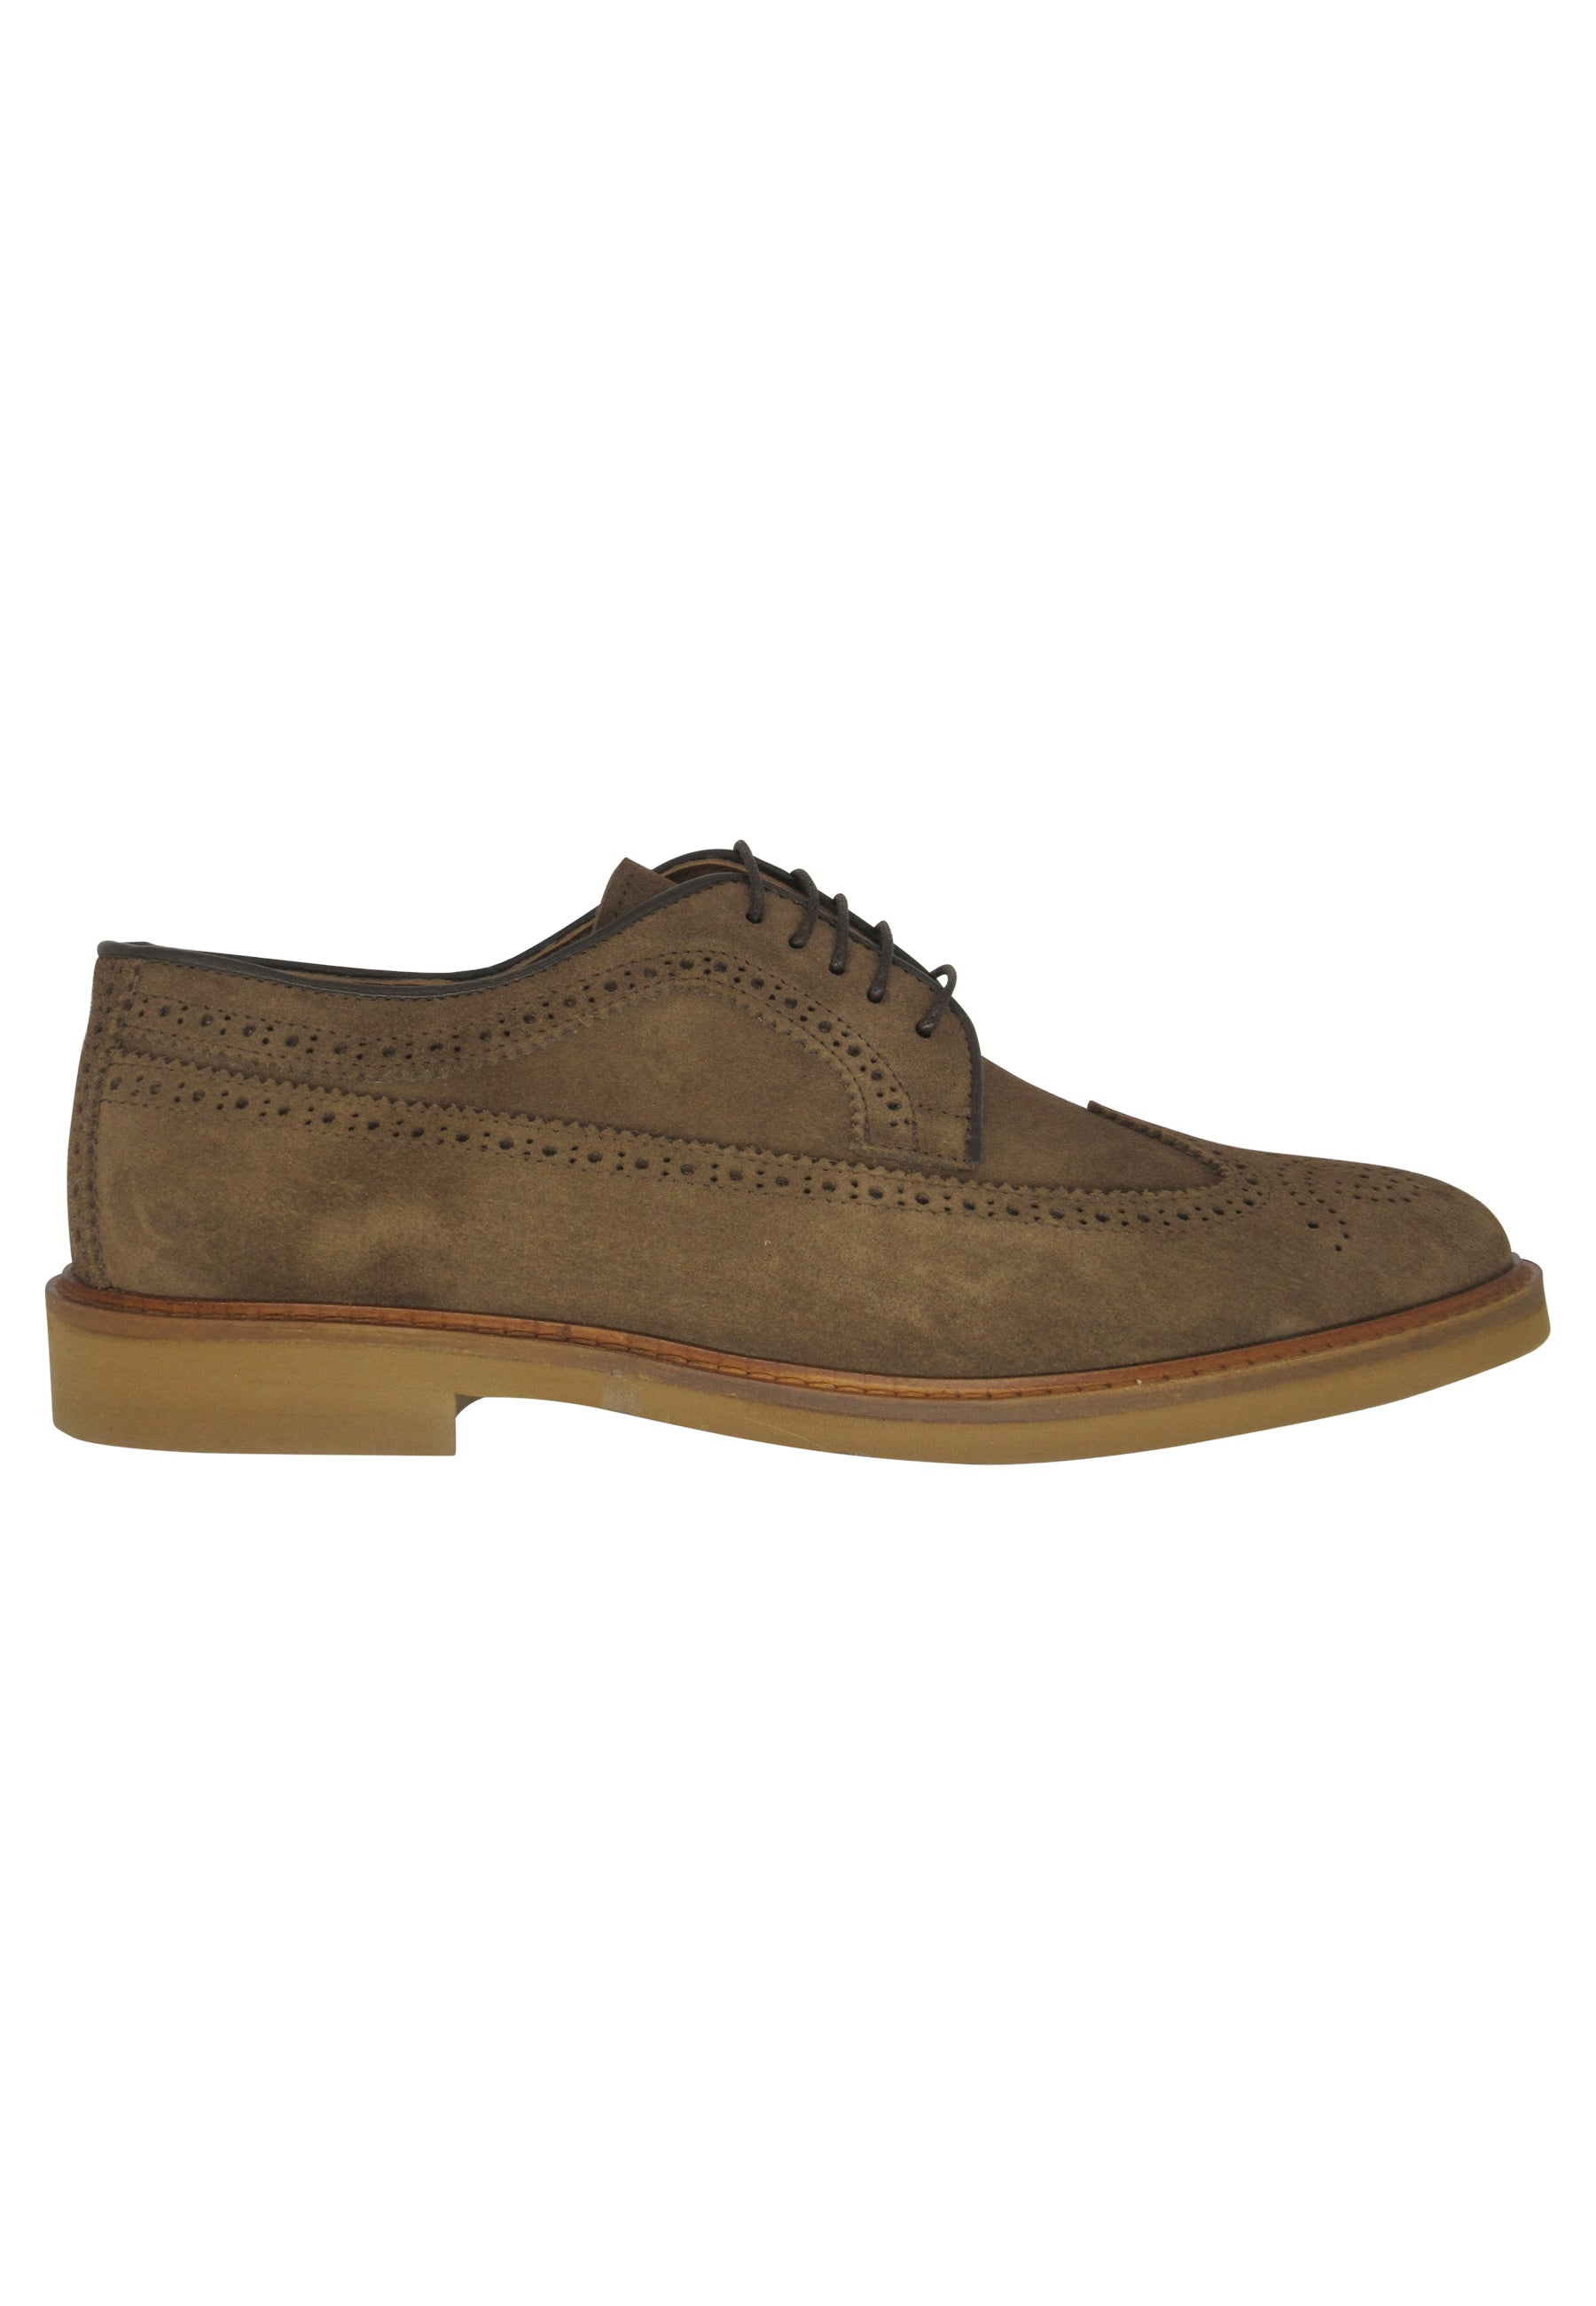 Men's cigar suede lace-ups with ultra-light rubber sole